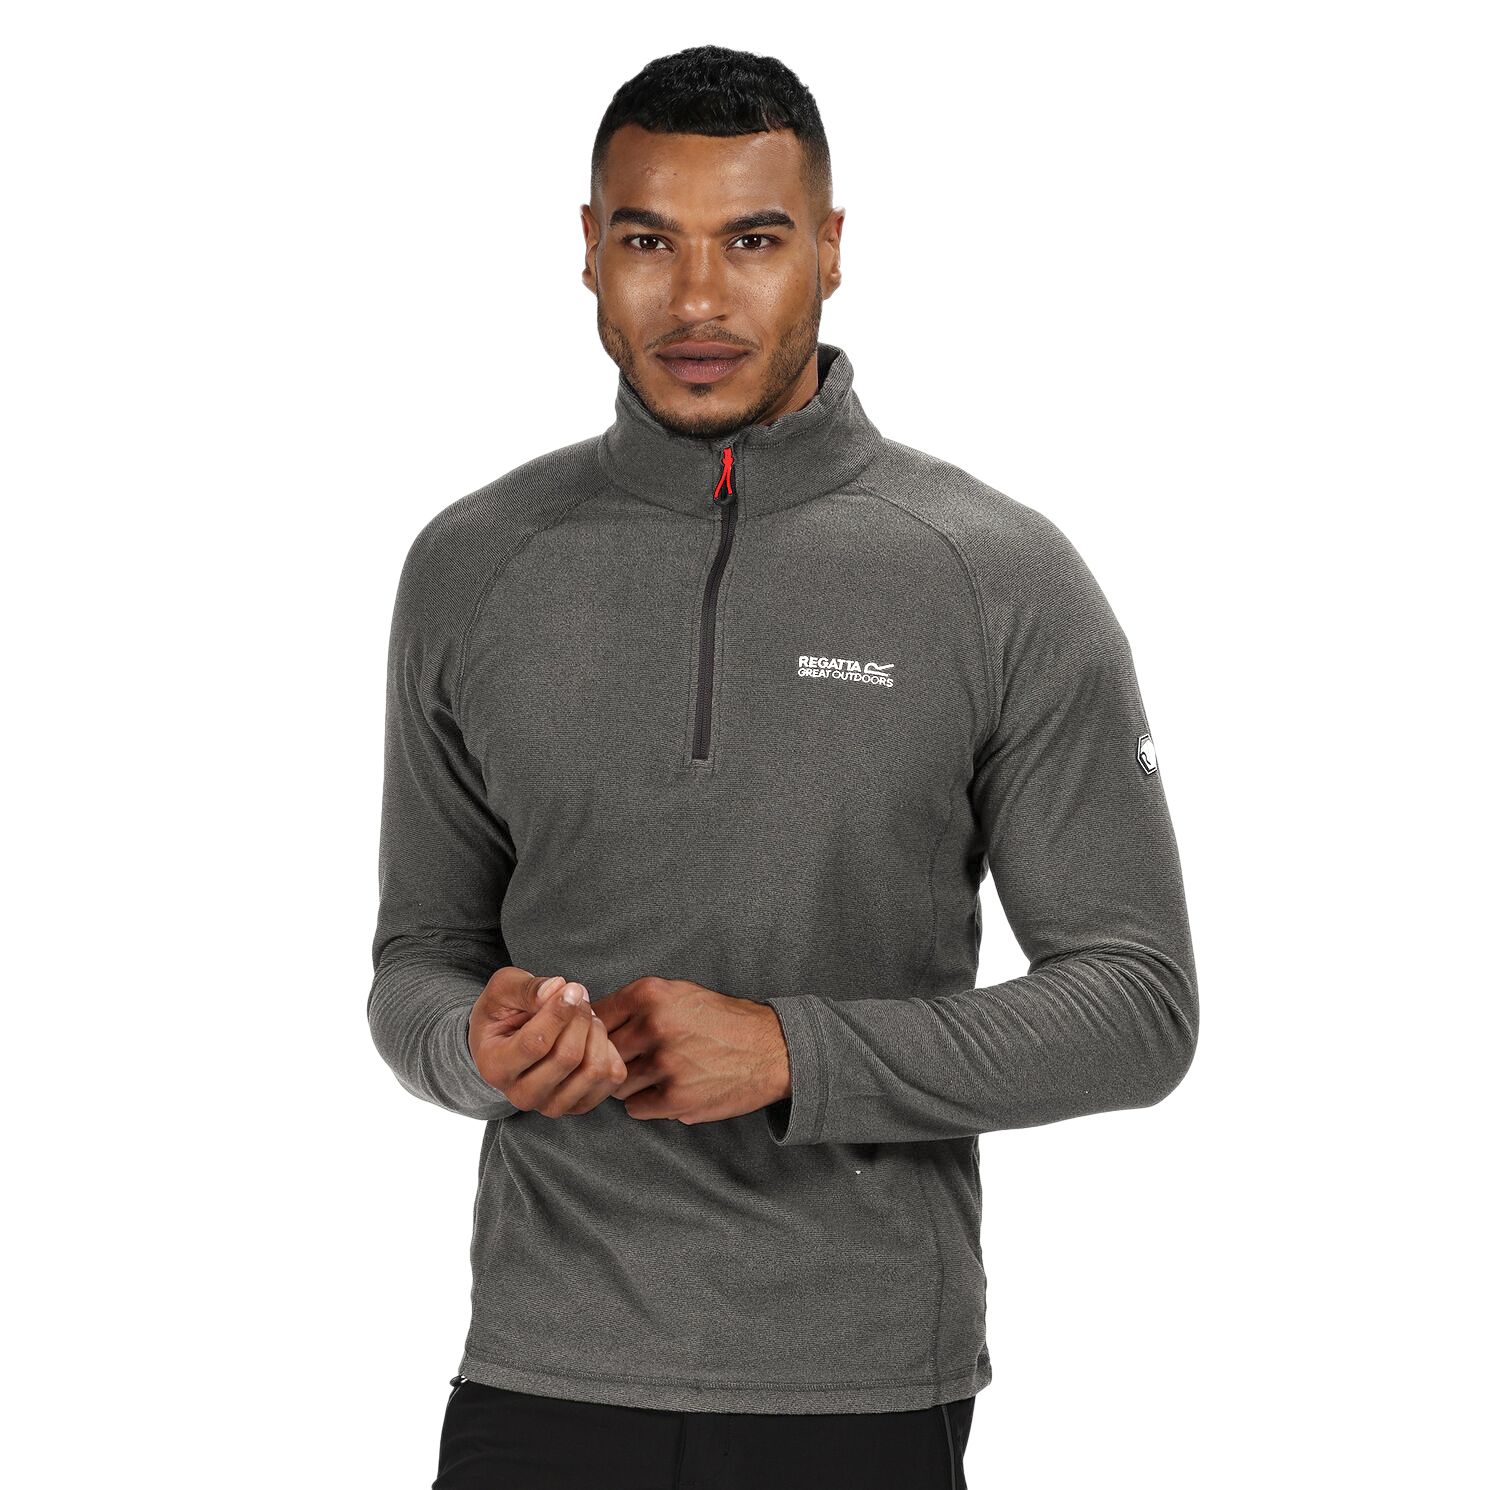 Mens half zip fleece top. Soft brushed back fabric. Regland sleeve design ensures mobility, while the funnel neck with a deep venting zip gives a snug fit. Fabric: 100% Polyester. Machine washable at 30c. Regatta Mens sizing (chest approx): XS (35-36in/89-91.5cm), S (37-38in/94-96.5cm), M (39-40in/99-101.5cm), L (41-42in/104-106.5cm), XL (43-44in/109-112cm), XXL (46-48in/117-122cm), XXXL (49-51in/124.5-129.5cm), XXXXL (52-54in/132-137cm), XXXXXL (55-57in/140-145cm).